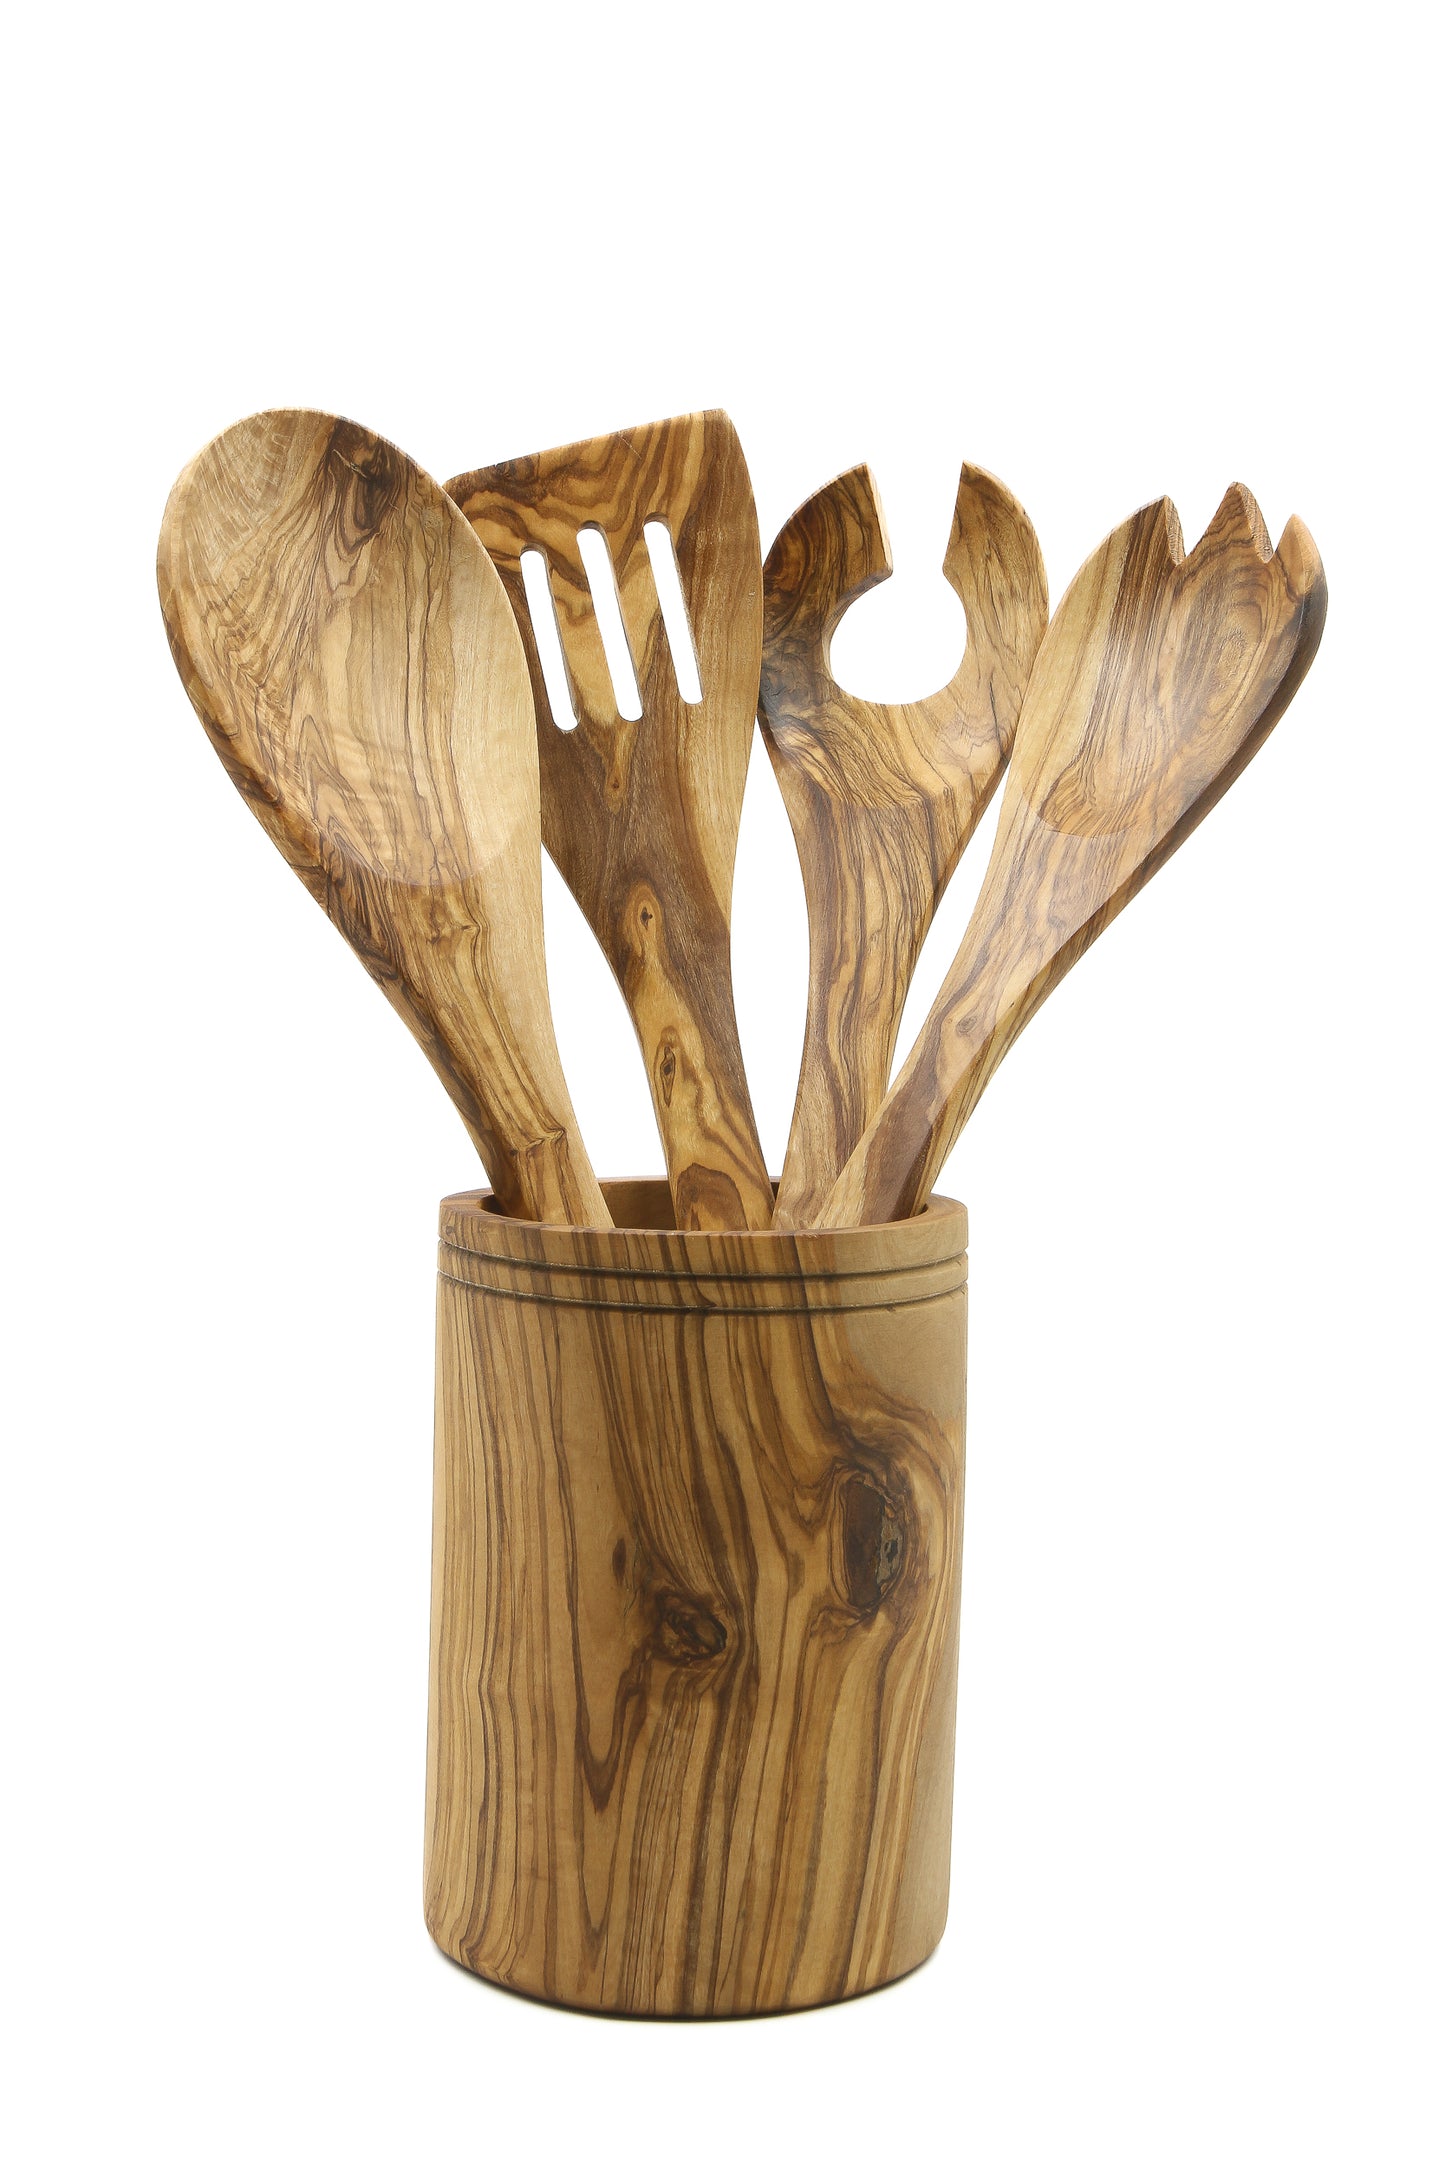 Unique olive wood kitchenware collection featuring spoon, forks, strainer, ladle, and holder